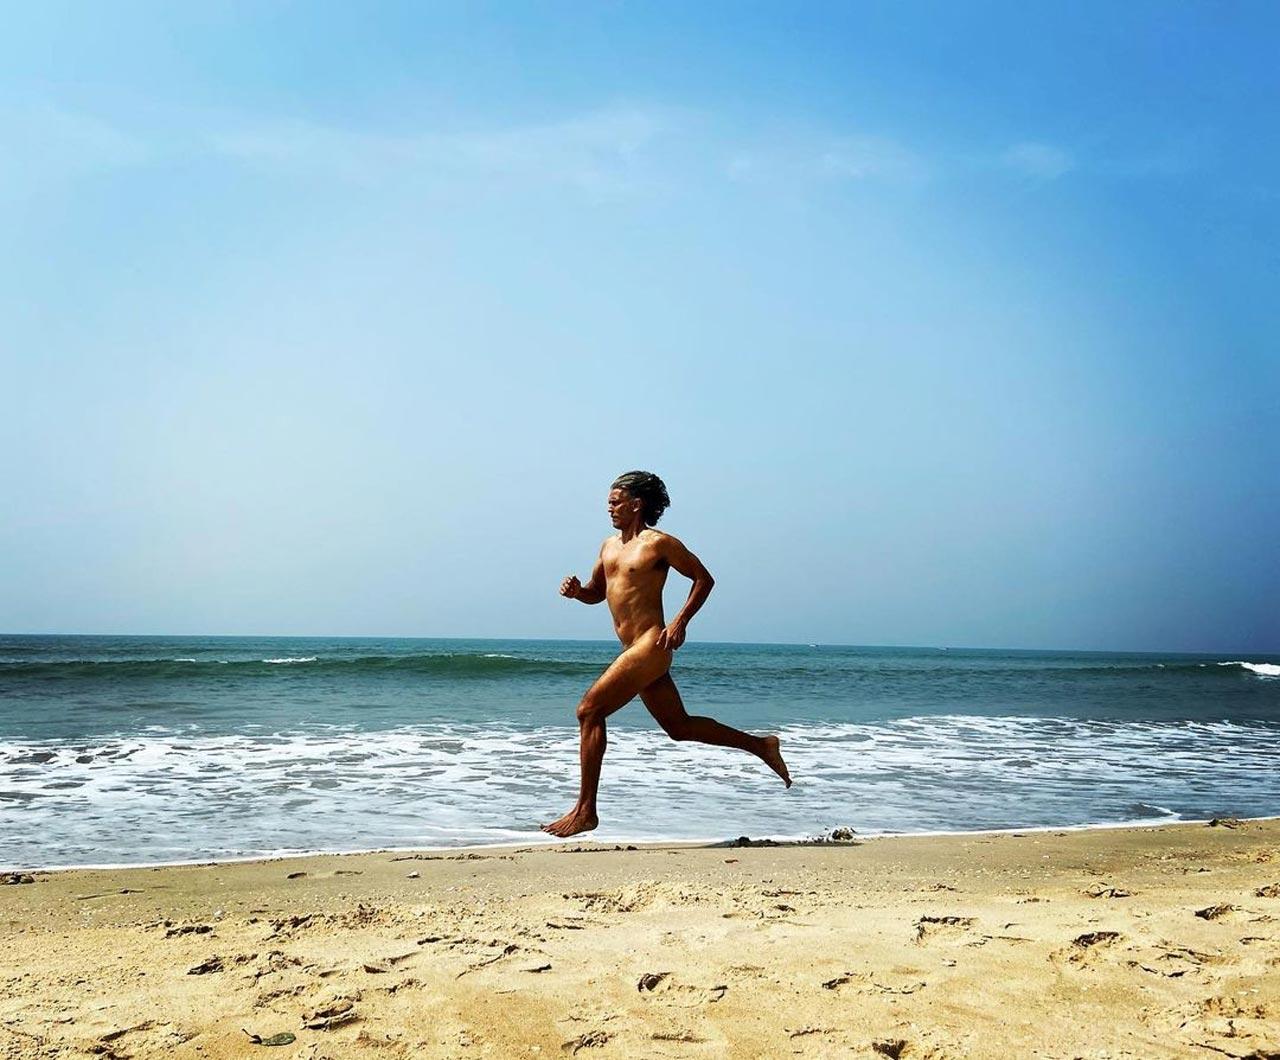 Milind Soman
Milind Soman turned 55 on November 4, 2020, and the actor shared just another age-defying picture on social media. This one not only created waves on social media but also the actor was booked by South Goa district police for obscenity, days after a nude photograph of the former supermodel taken while running on a Goa beach went viral. A Goa Police spokesperson said that an FIR under Section 294 (obscenity) of the Indian Penal Code, along with other relevant sections of the Information Technology Act, has been registered against Soman (picture courtesy: Milind Soman's Official Instagram account)